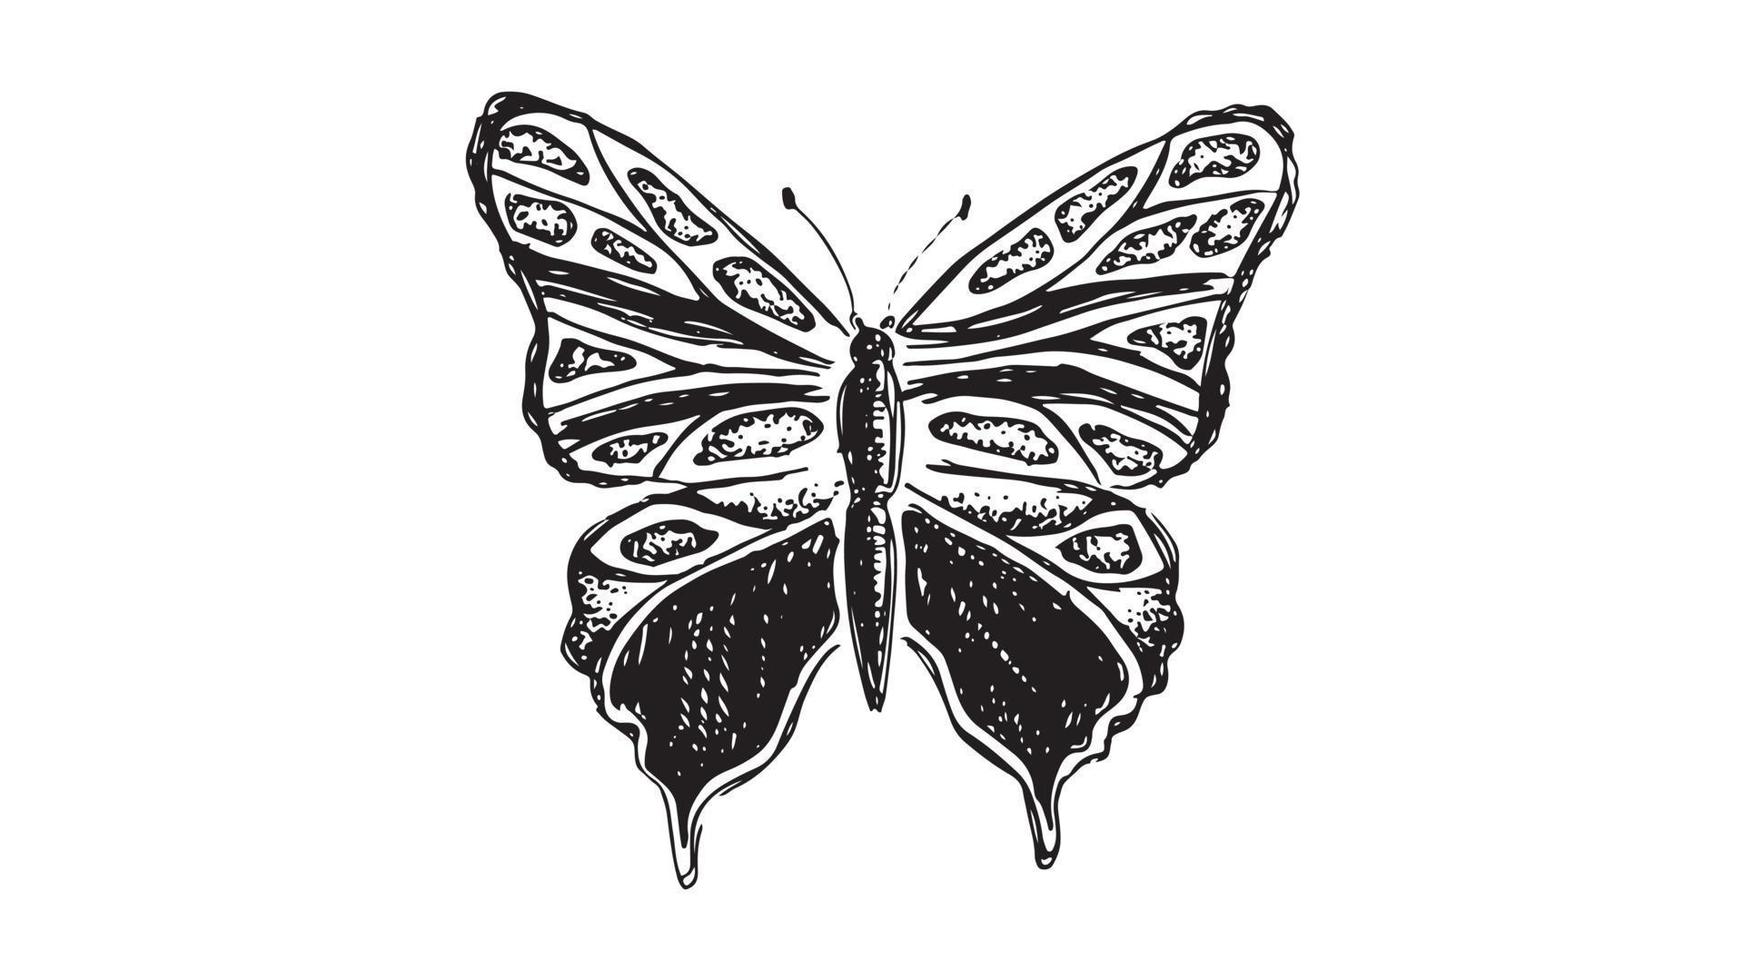 Butterfly hand drawn vector illustrations.